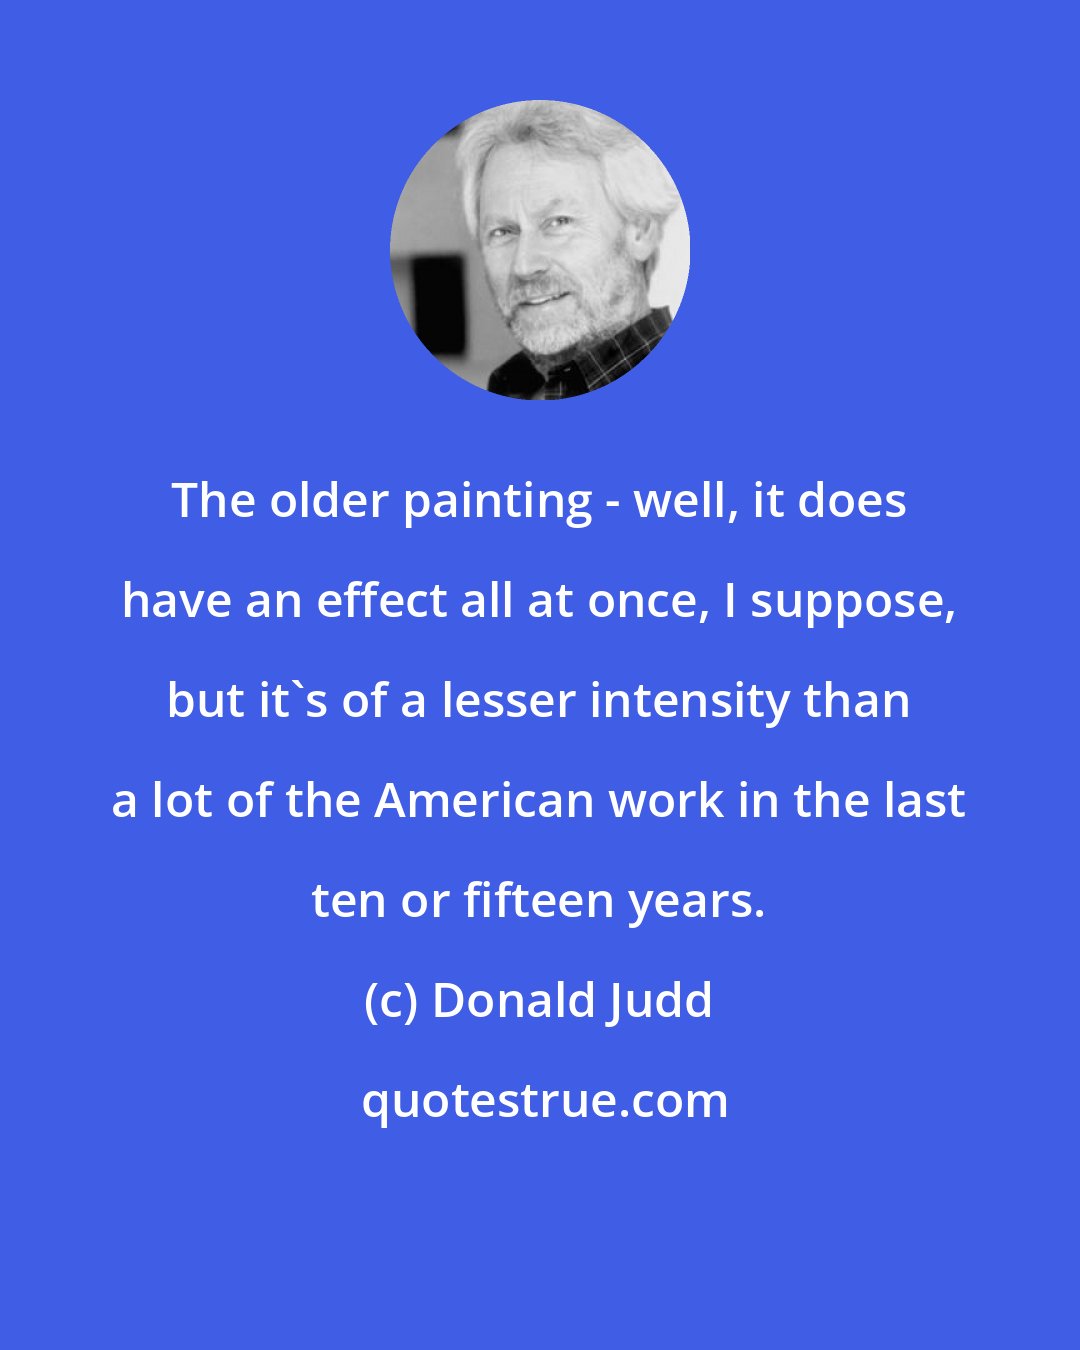 Donald Judd: The older painting - well, it does have an effect all at once, I suppose, but it's of a lesser intensity than a lot of the American work in the last ten or fifteen years.